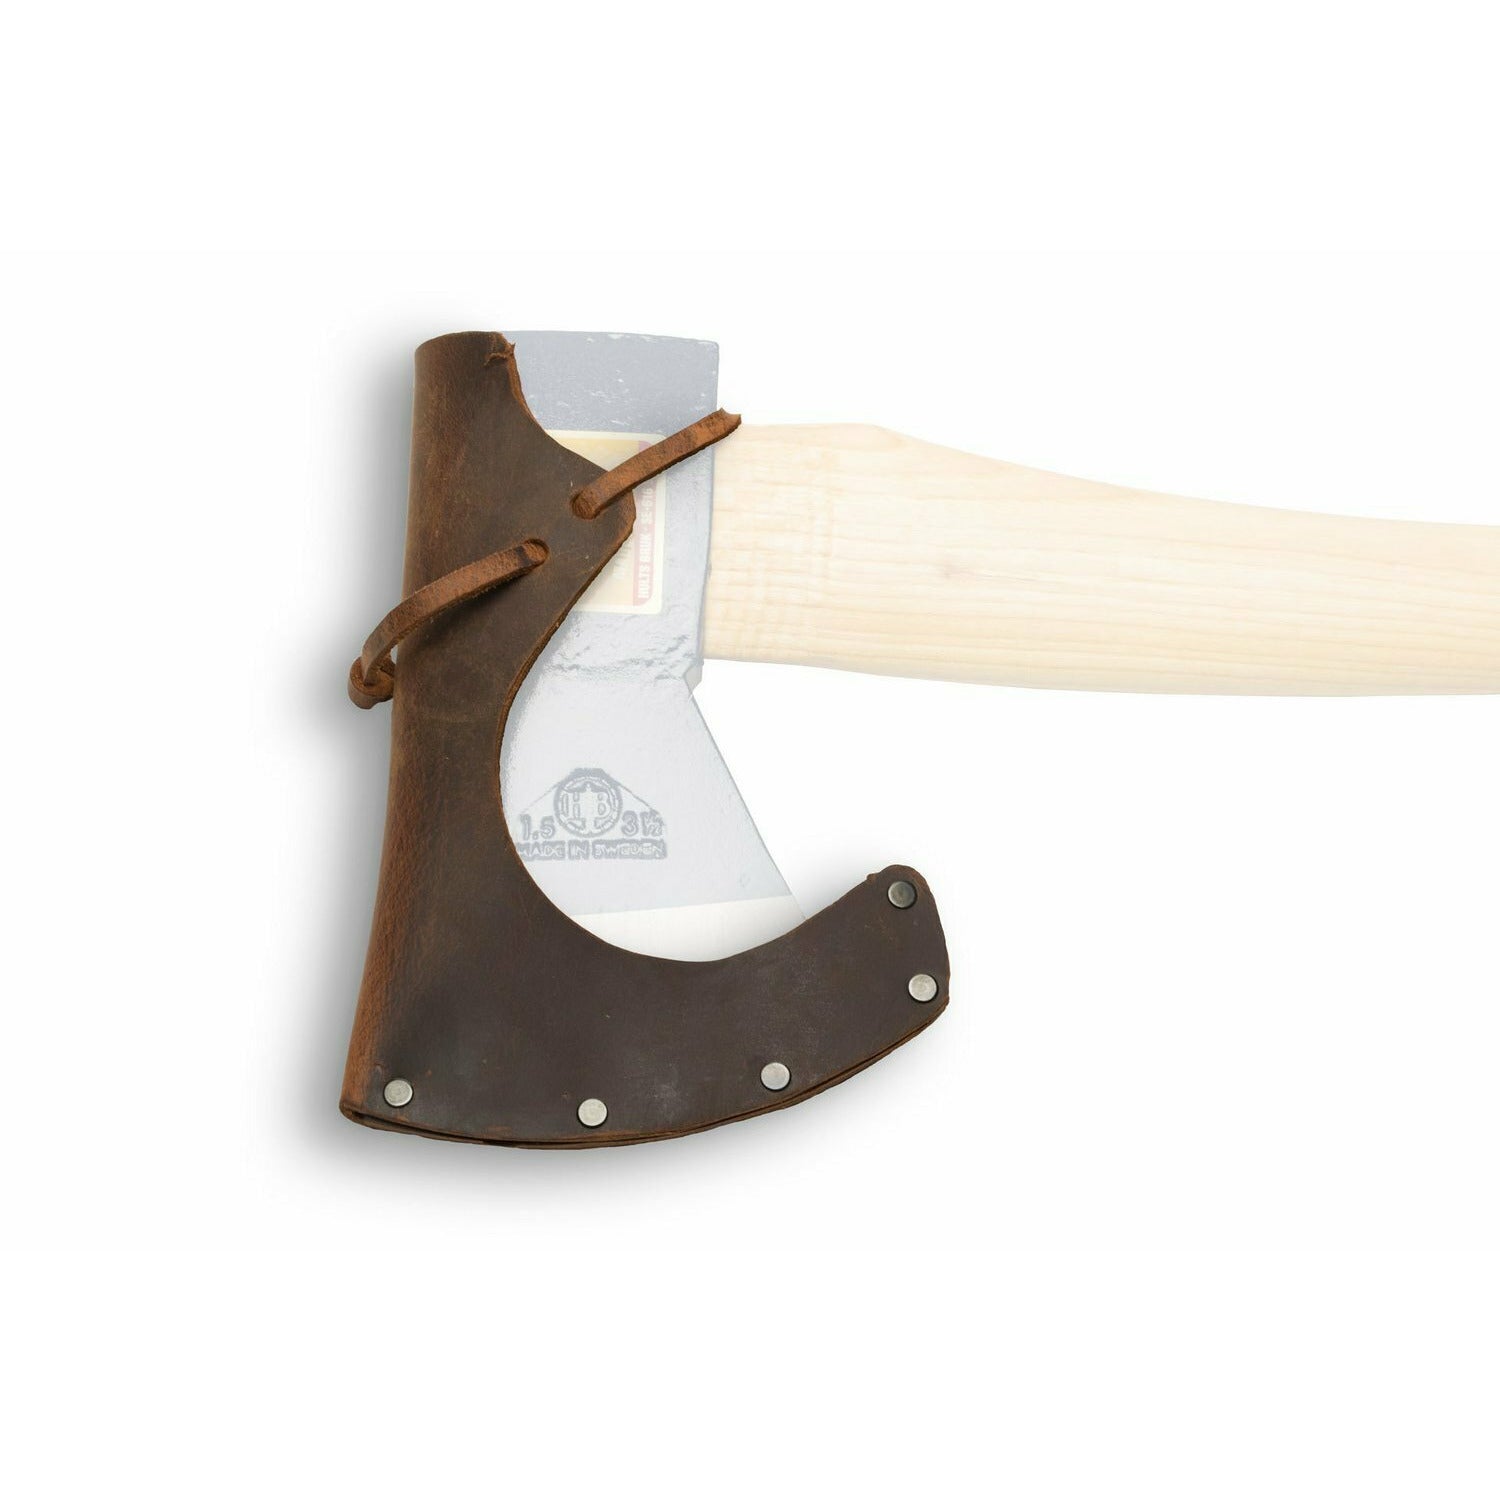 AGDOR Felling Axe, Montreal Pattern, Larger Model, 3.5 lbs - Axeman.ca